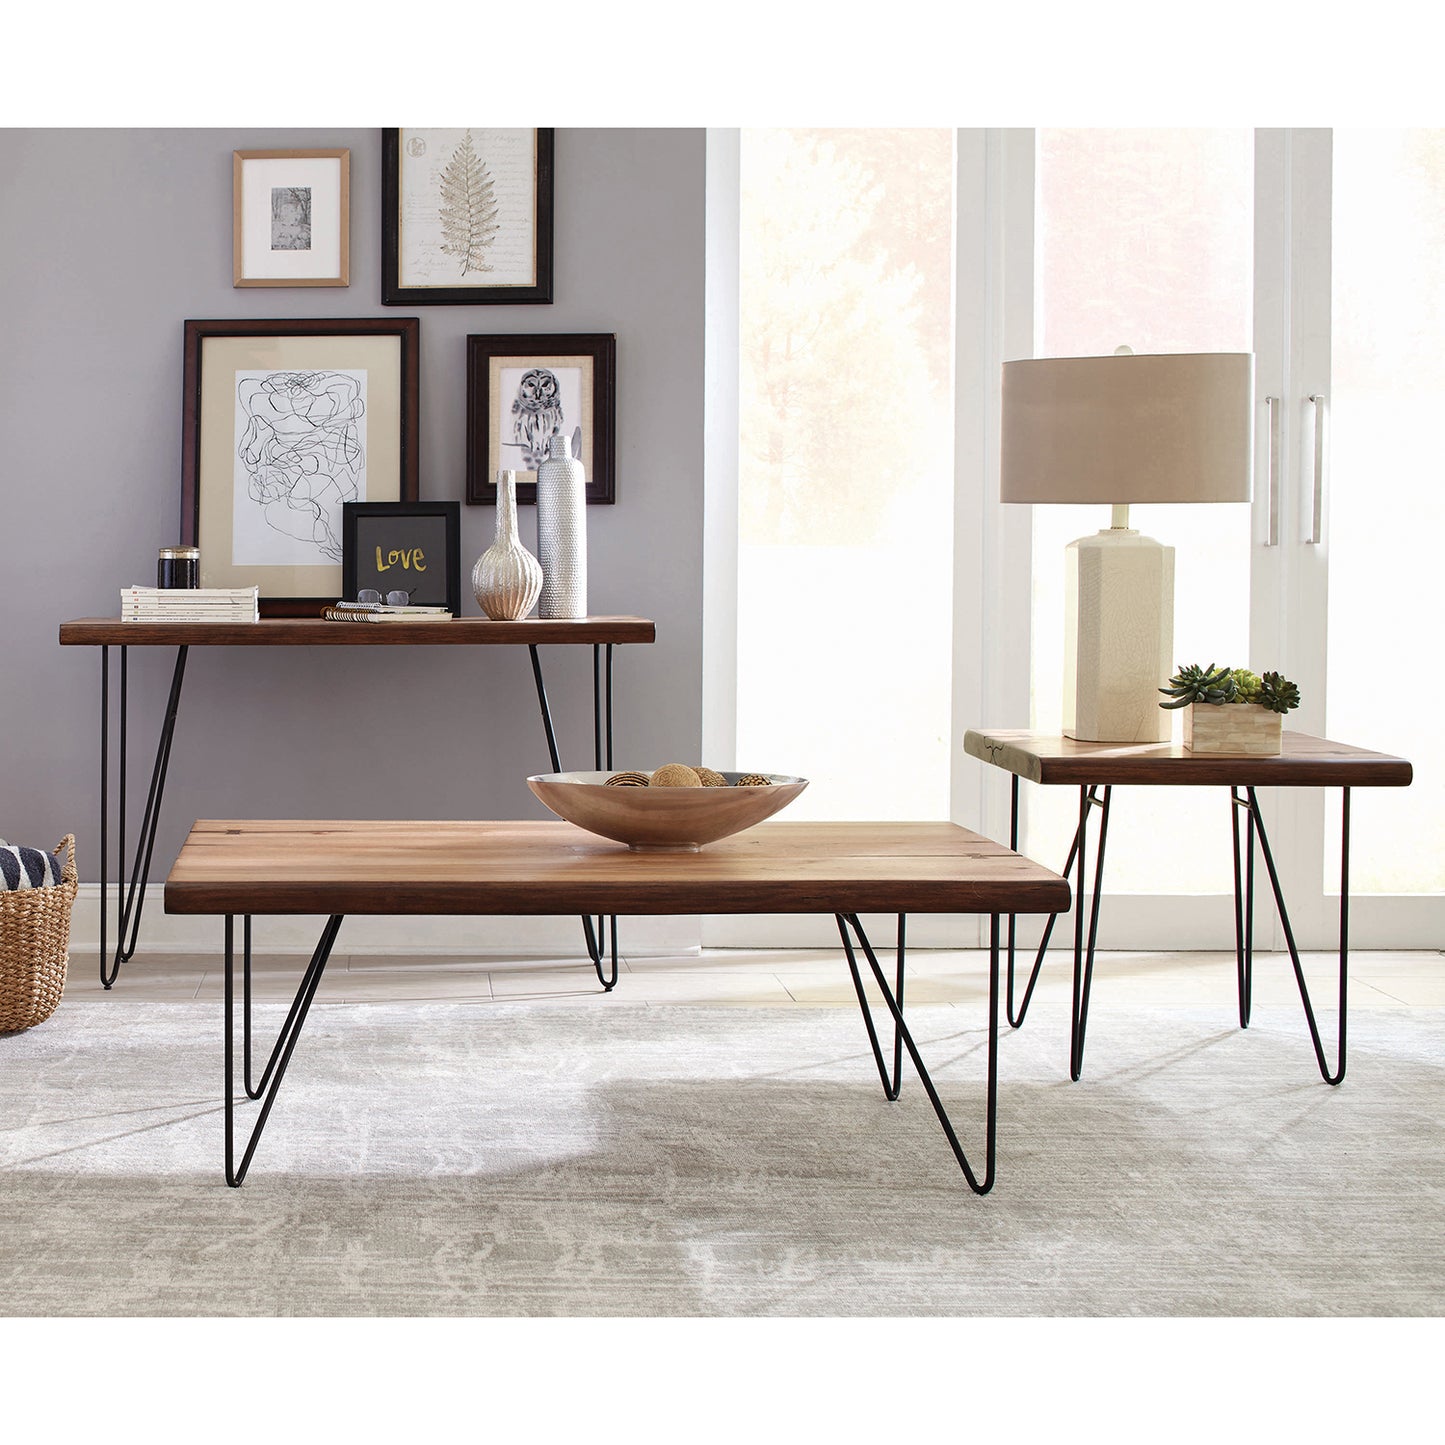 Sofa Table with Hairpin Legs Natural Honey and Gunmetal